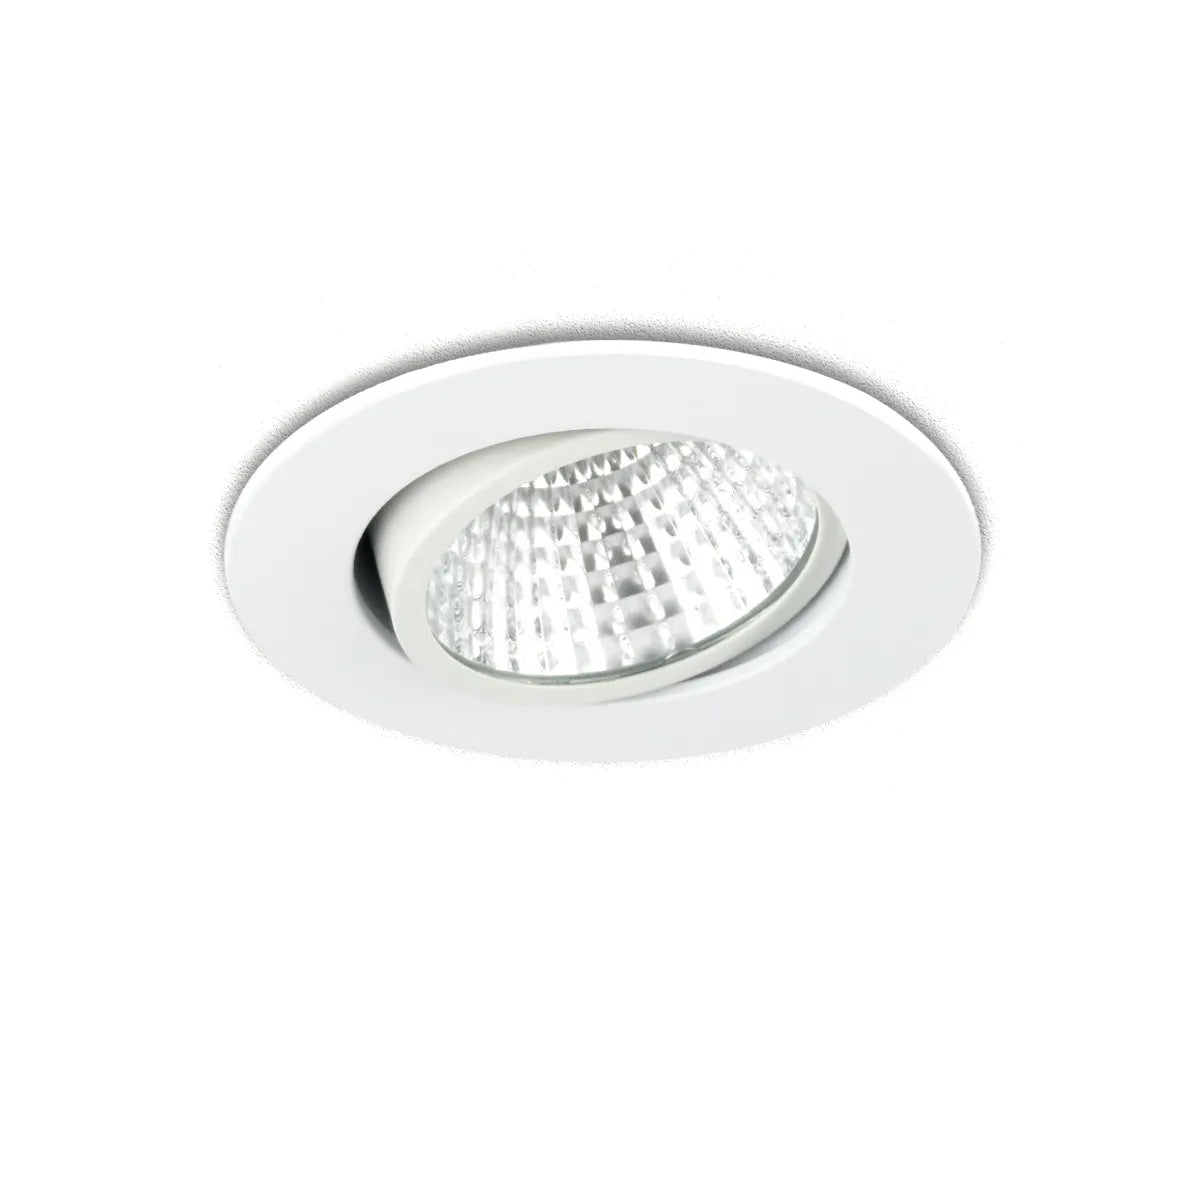 Spot encastrable LED 5W ⌀85mm dimmable inclinable